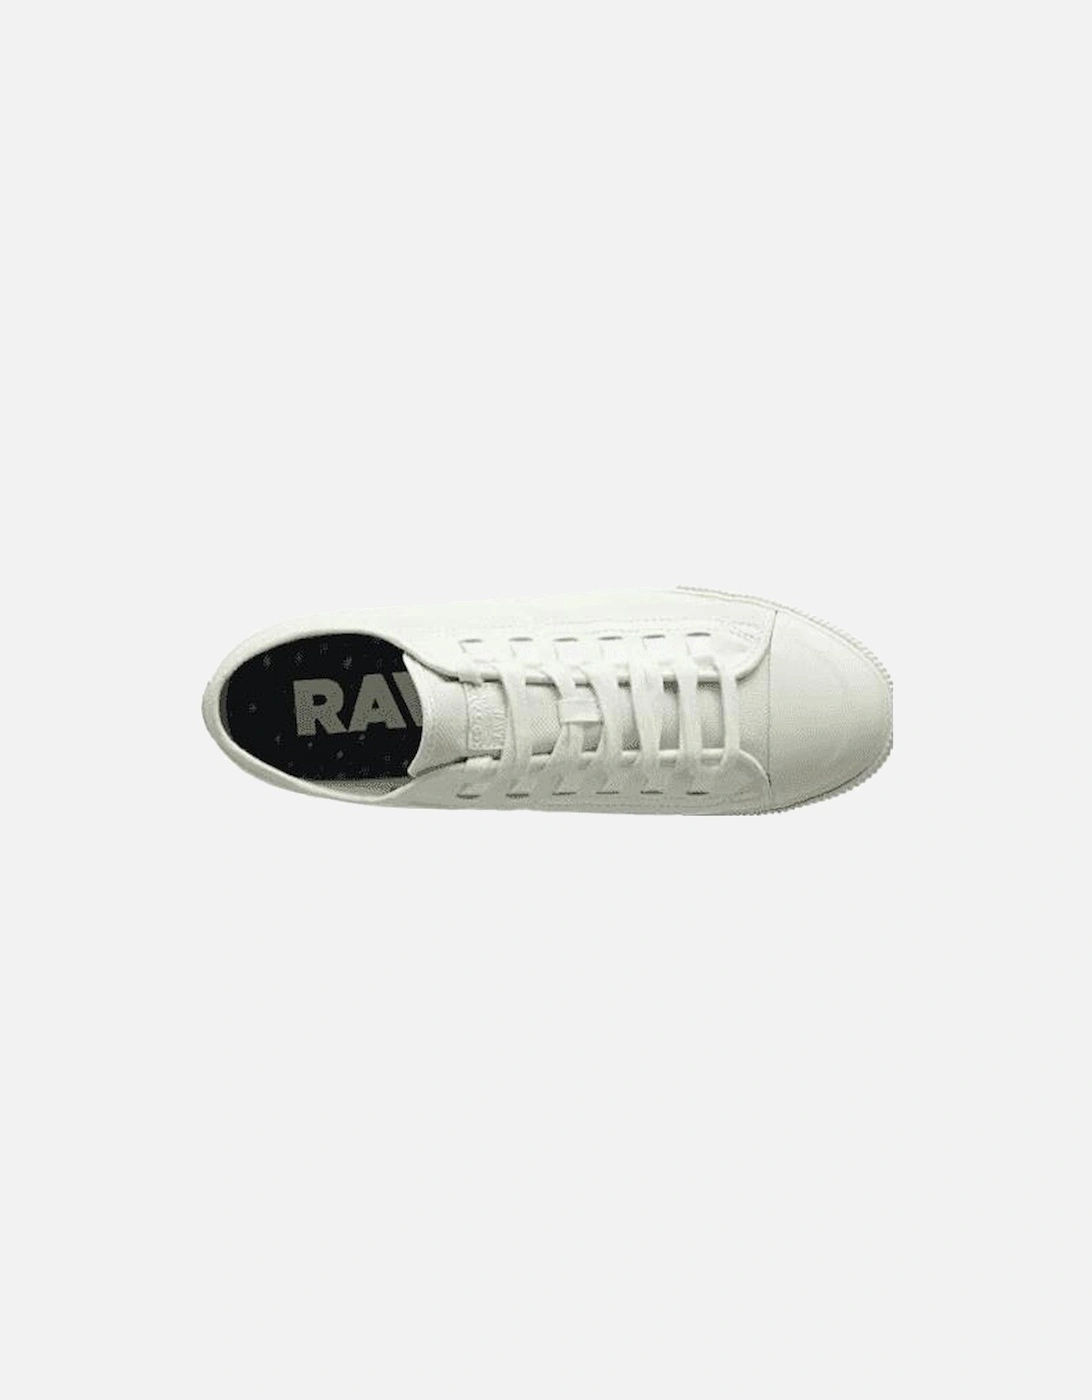 Lace Up Canvas Milk White Trainers